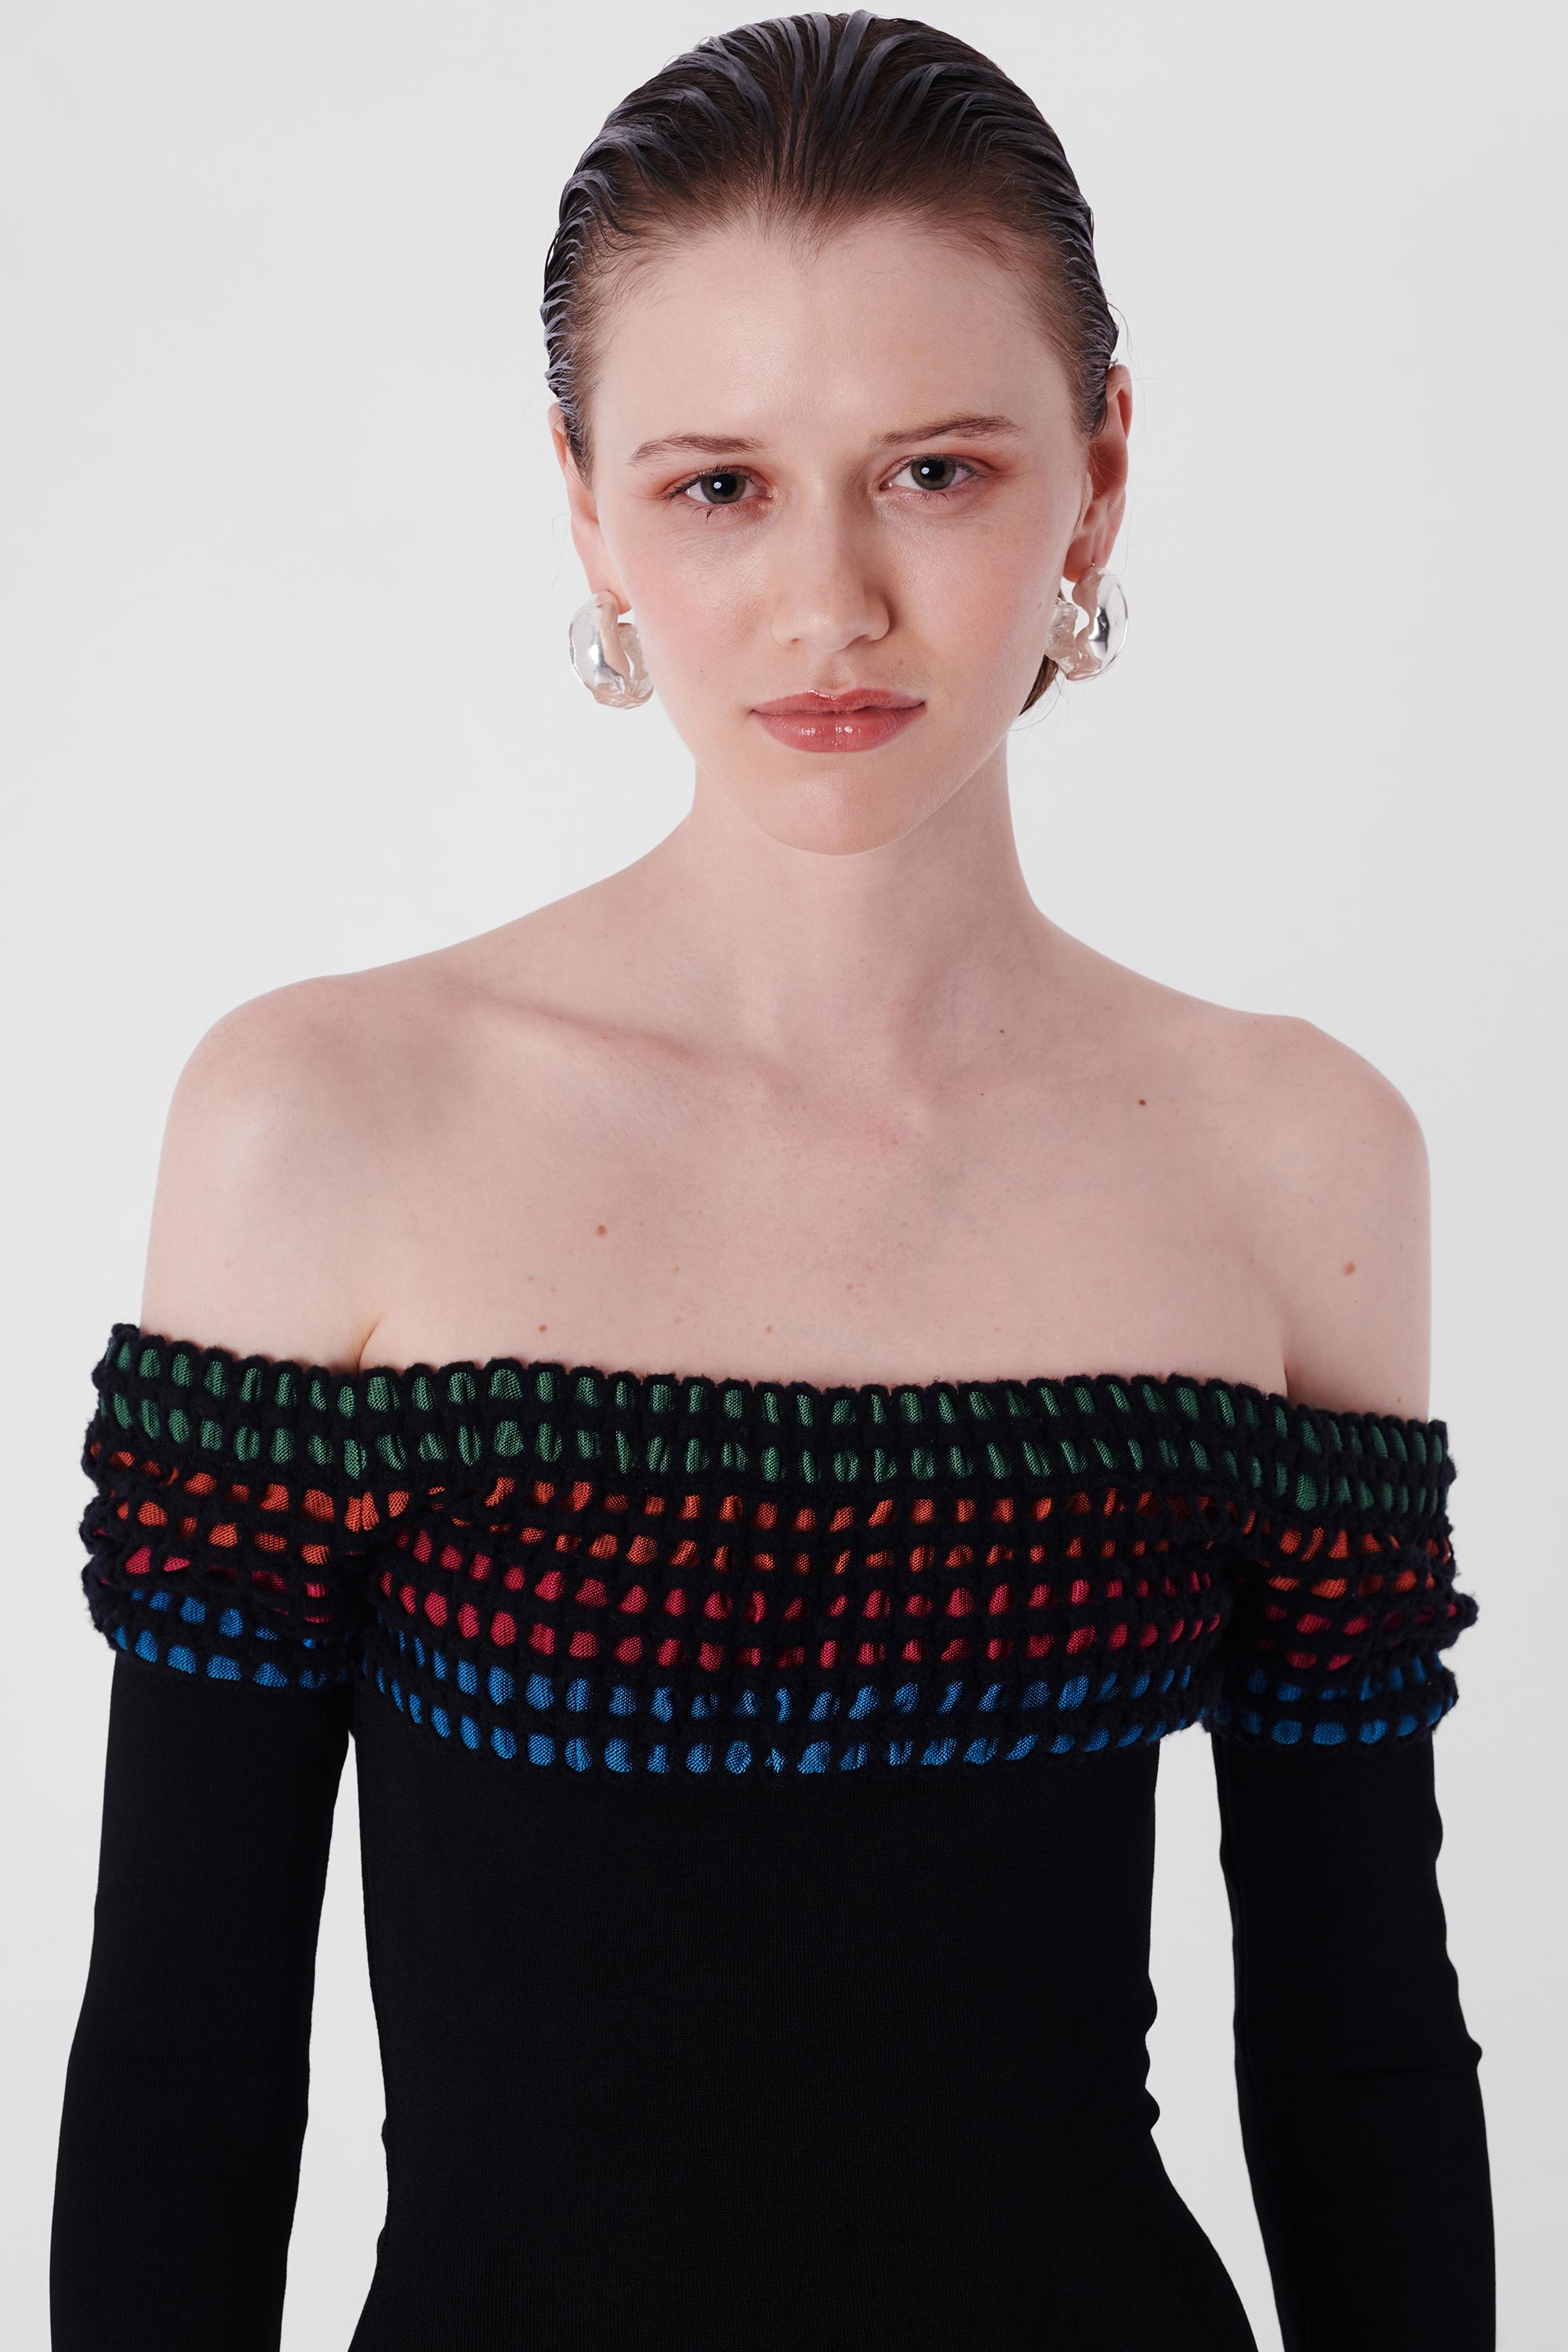 Alaia 1990's Black Contour Bodycon Dress. Features off shoulder neckline, long sleeves, rainbow crochet neckline and hem, concealed back zipper and mini length. In excellent vintage condition.

Label size: N/A
Modern size: UK: 8 to 10, US: 2 to 6,